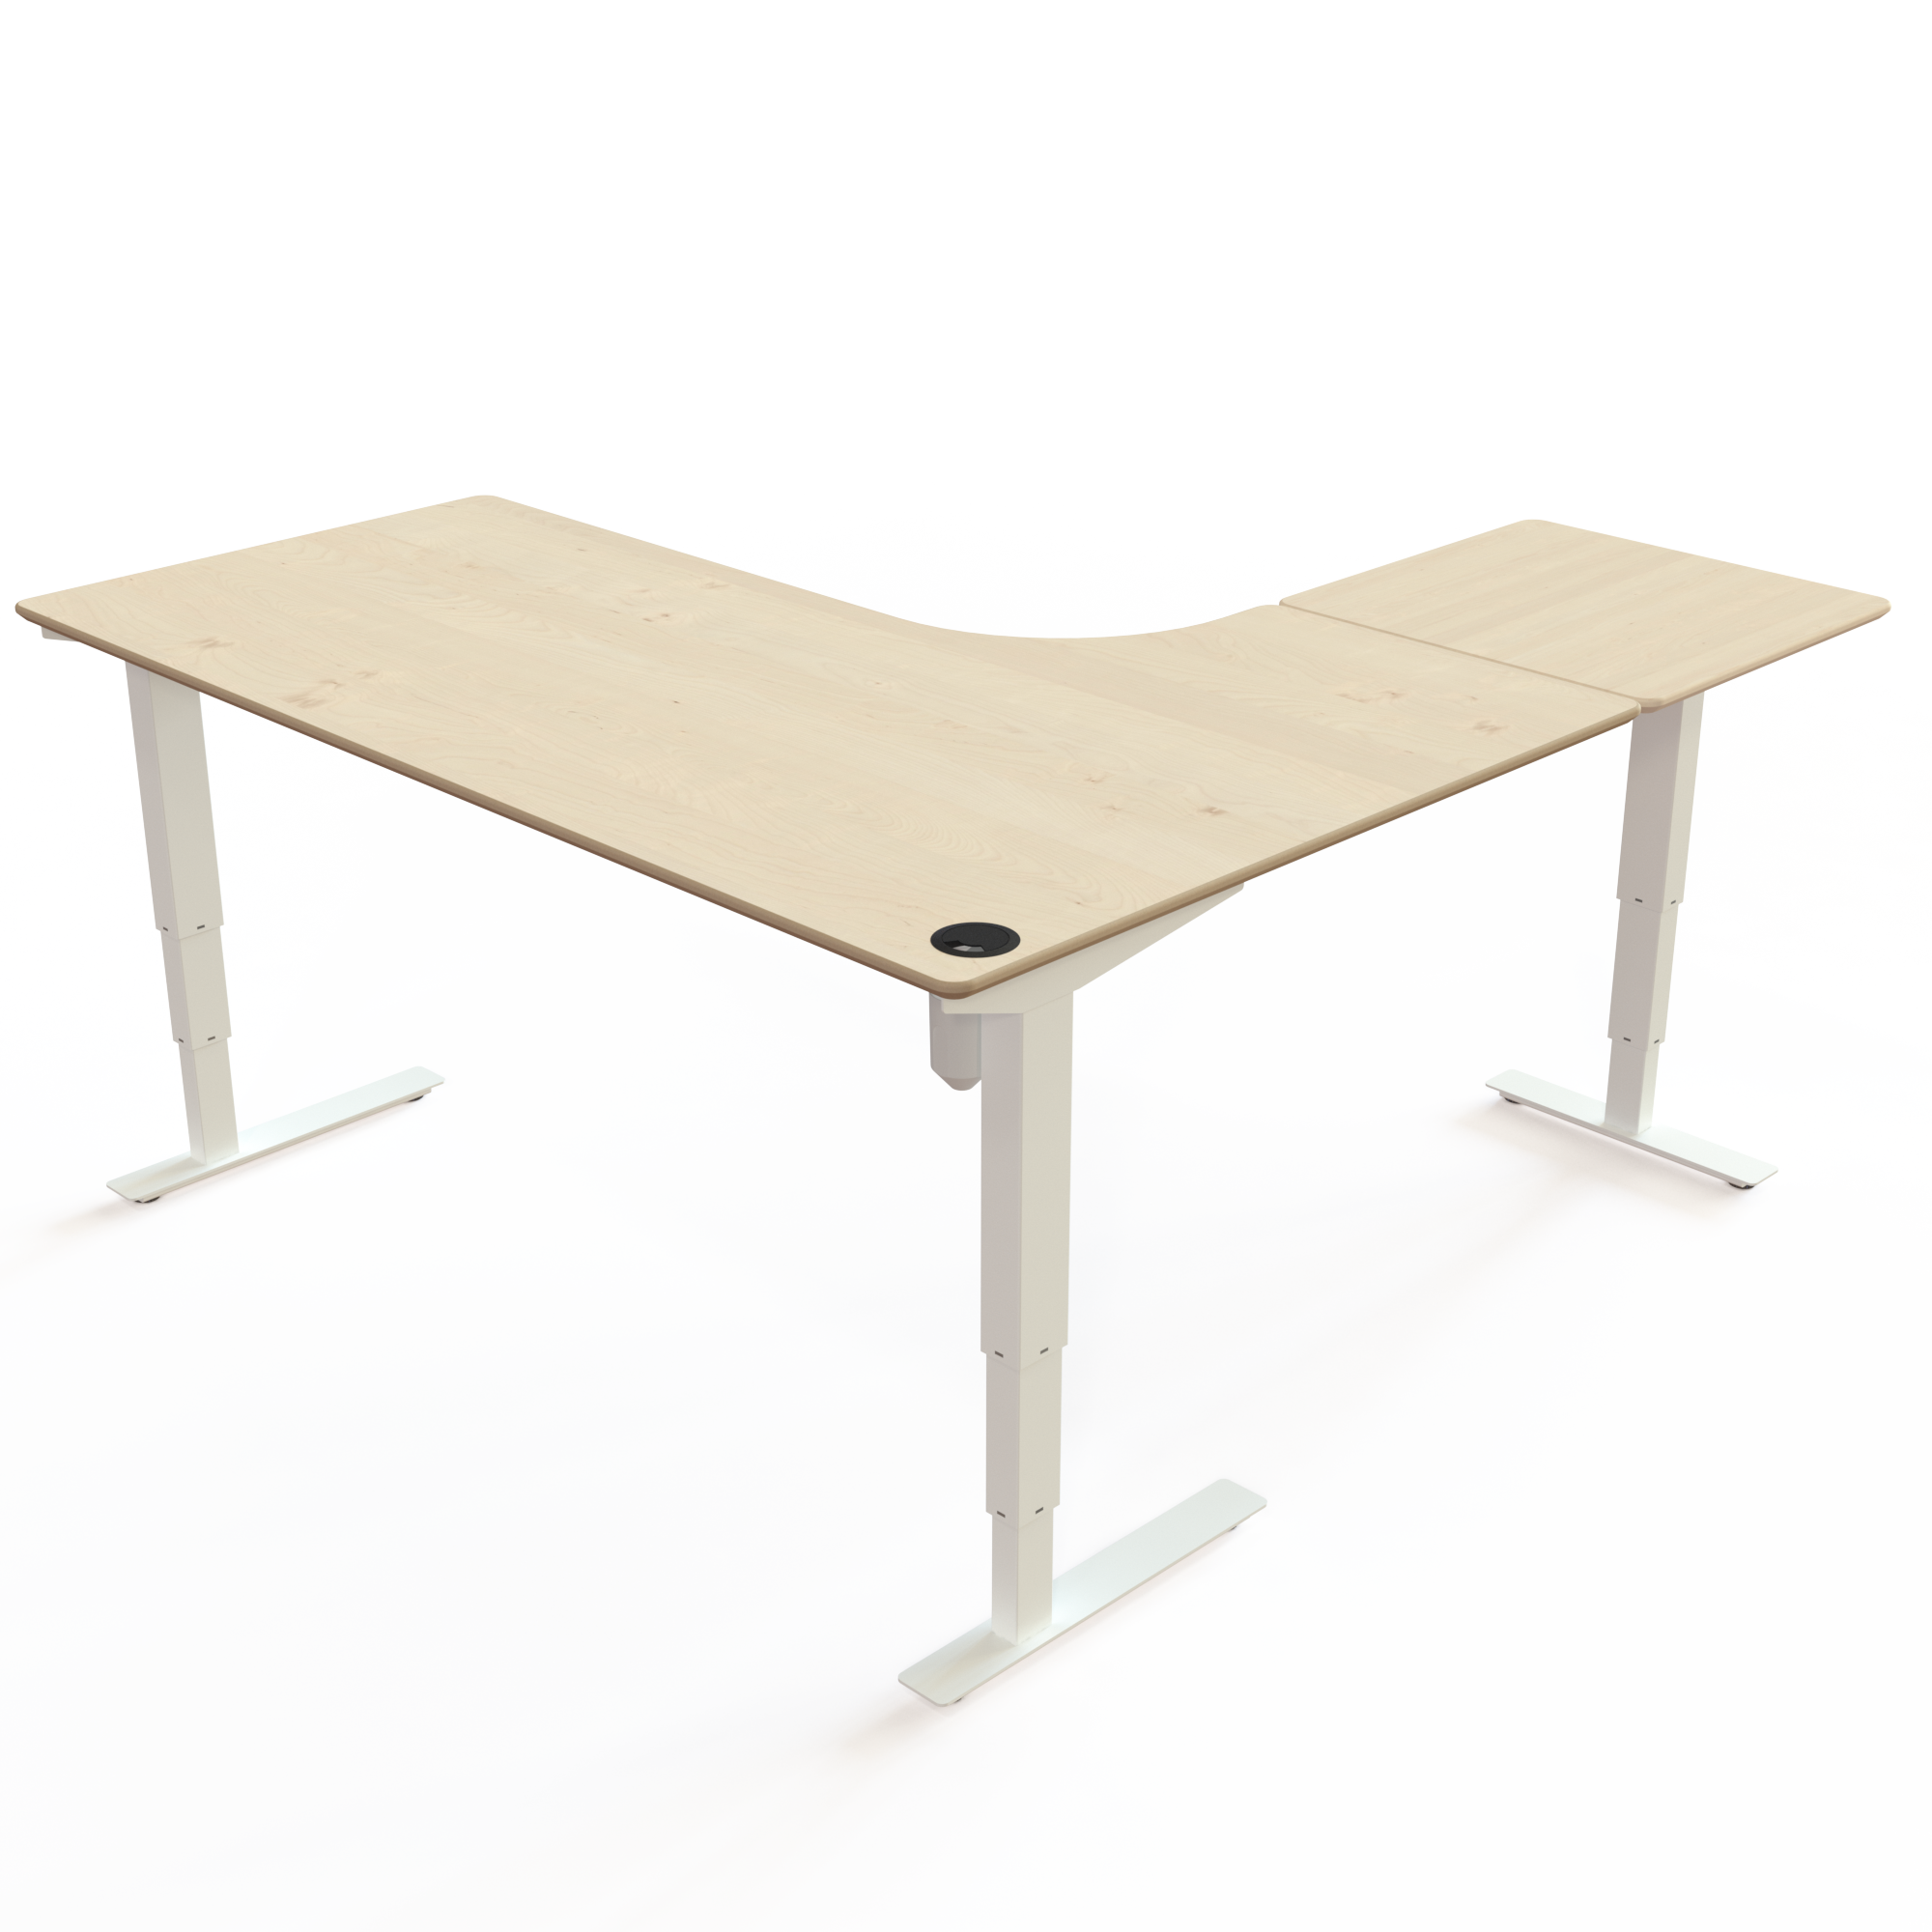 Electric Adjustable Desk | 180x180 cm | Maple with white frame